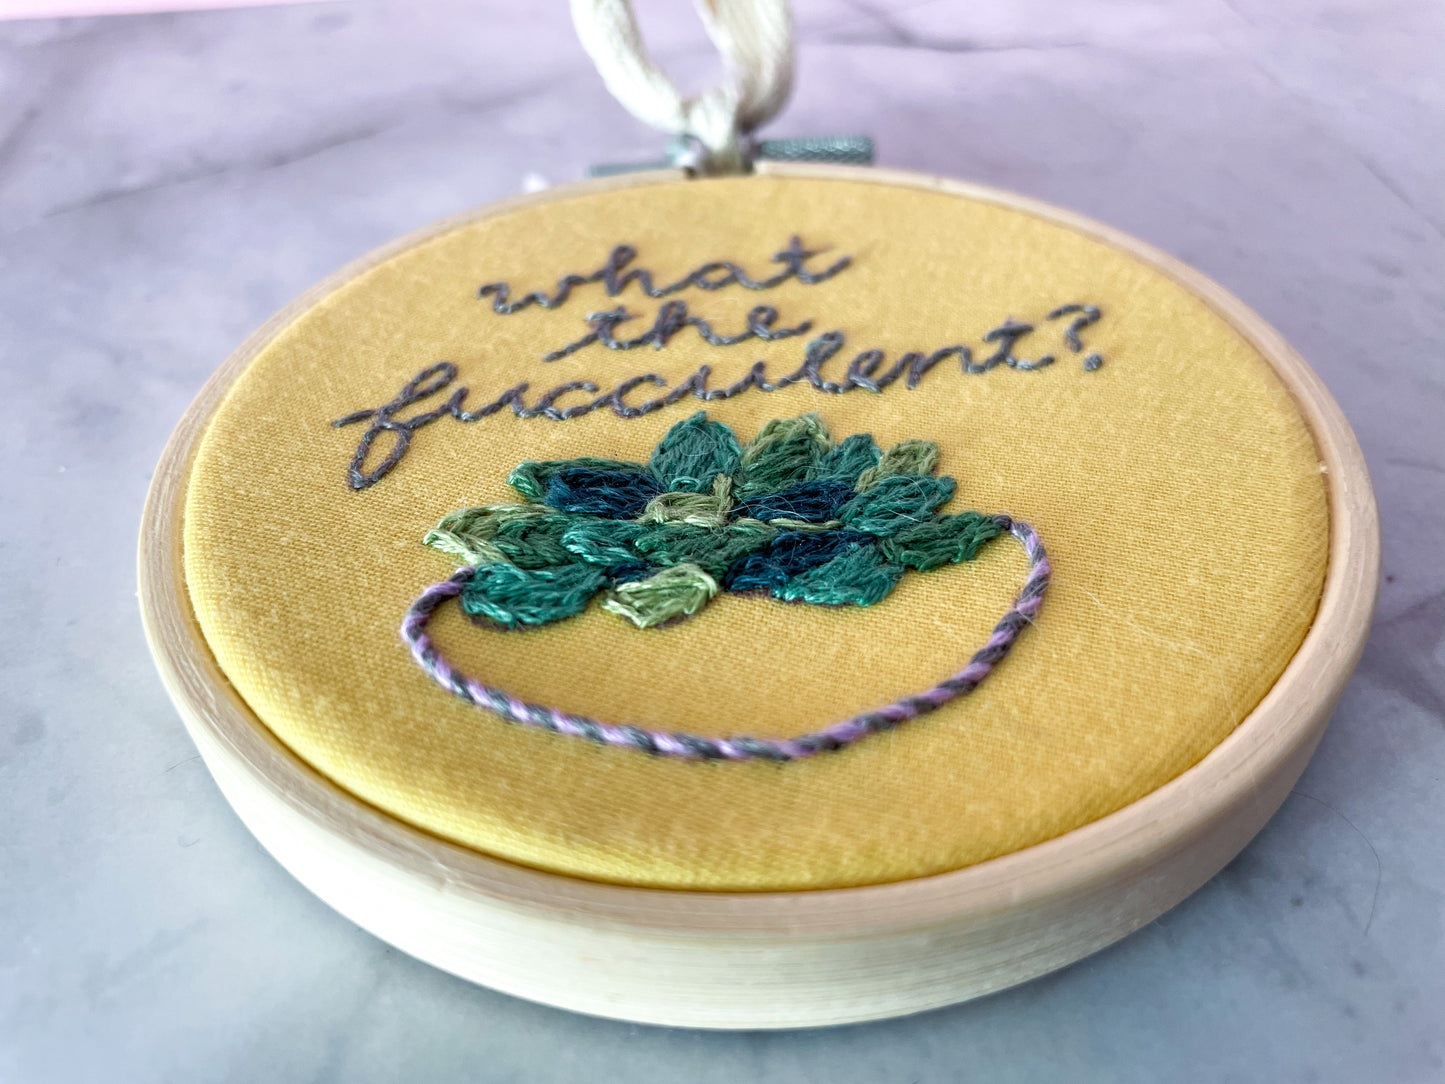 "What the Fucculent" 4" Embroidery